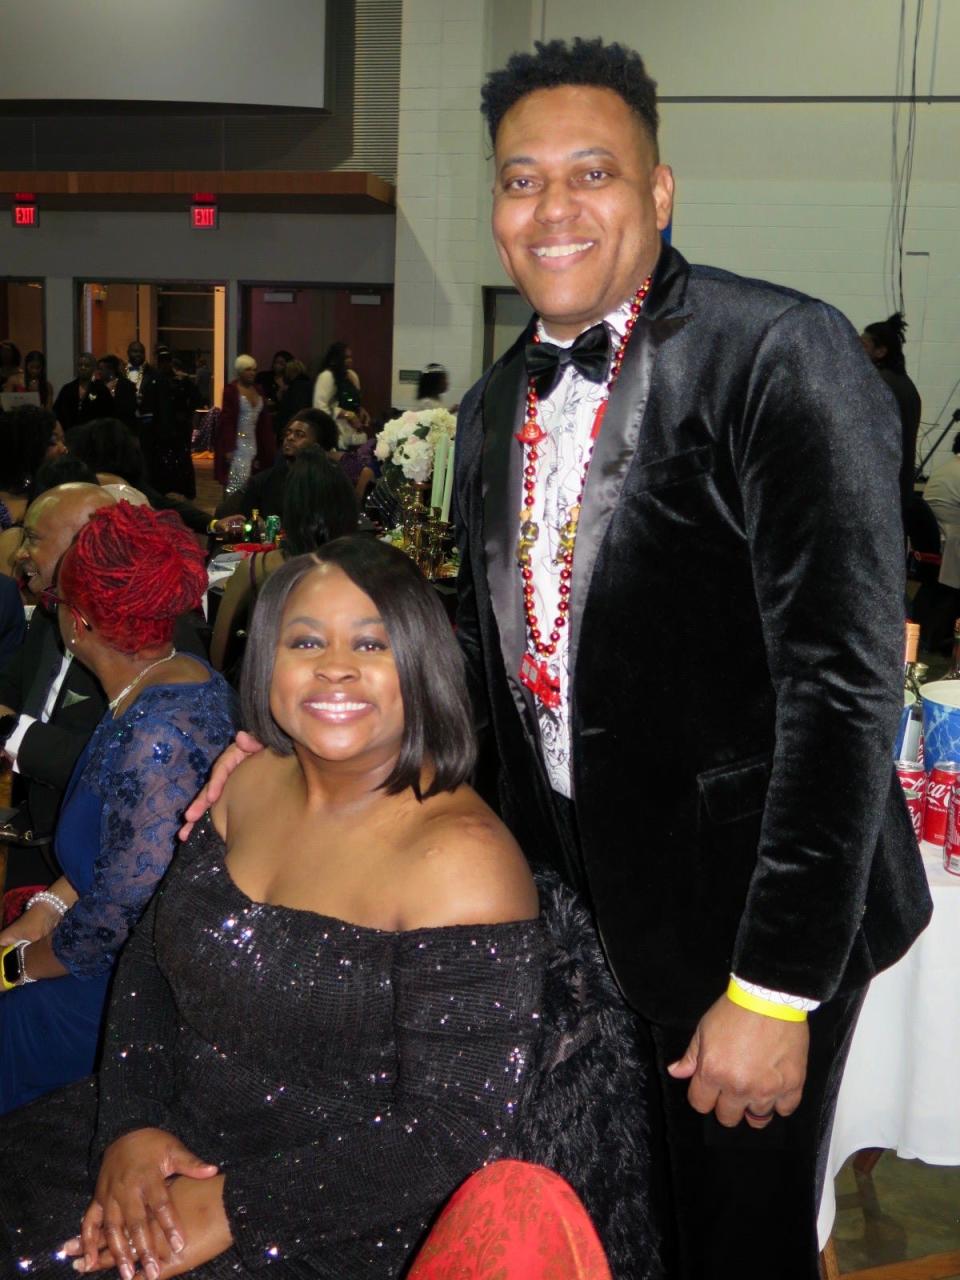 Chelsa Reese and Shreveport Fire Chief Clarence Reese, Jr. at the Krewe of Sobek Grande Bal in the Shreveport Convention Center on January 12, 2024.